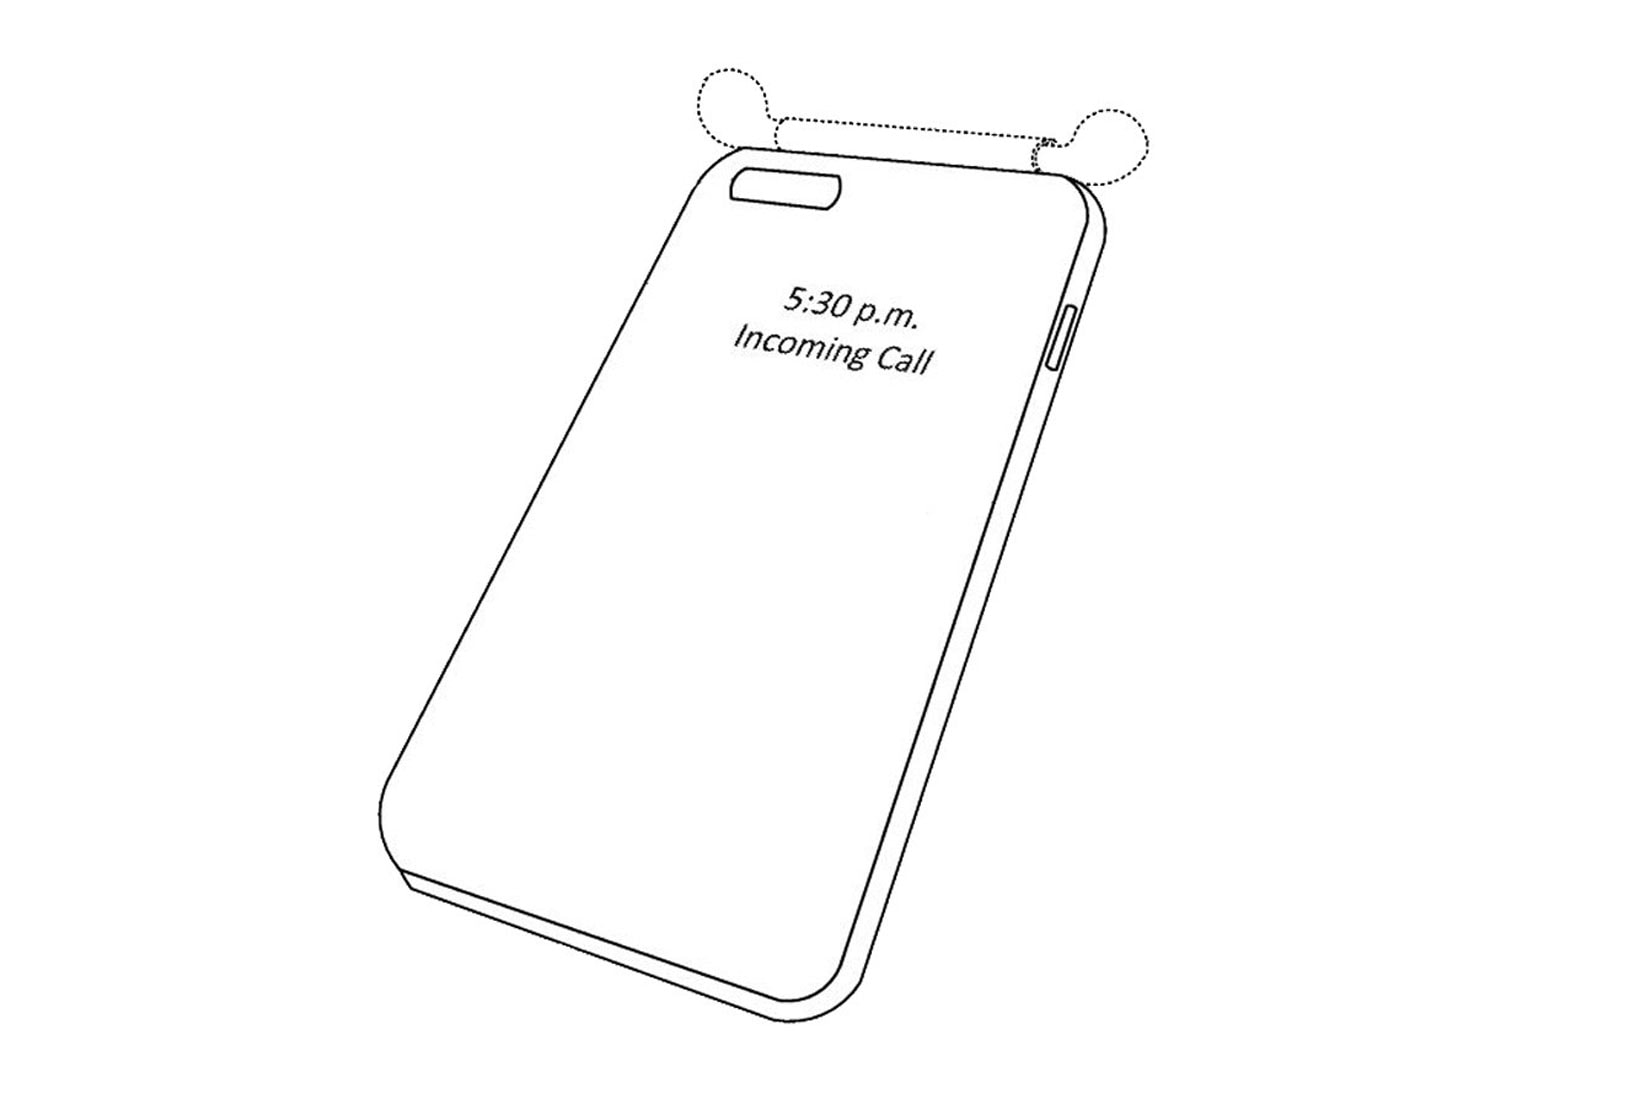 apple iphone case airpods charging built-in integrated design mock-up illustration drawing